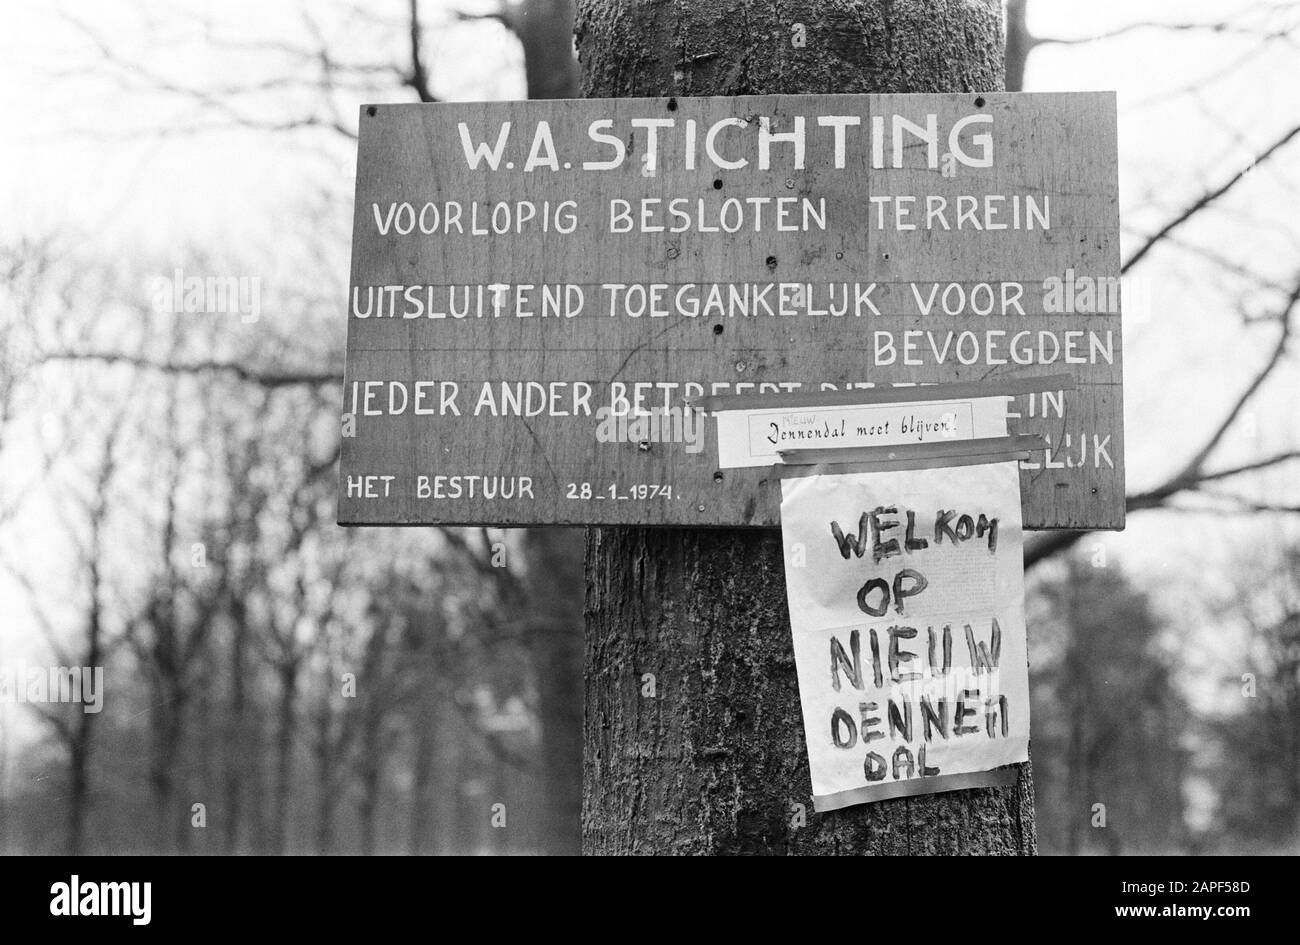 The perikelen around Dennendal Description: Board on the site of the Willem Arntz Foundation, to which a paper with 'welcome op Nieuw Dennendal' is attached Date: 29 January 1974 Location: Den Dolder (Zeist), Utrecht Keywords: occupations, signs, institutions, psychiatry Institution name: Willem Arntsz Foundation Stock Photo